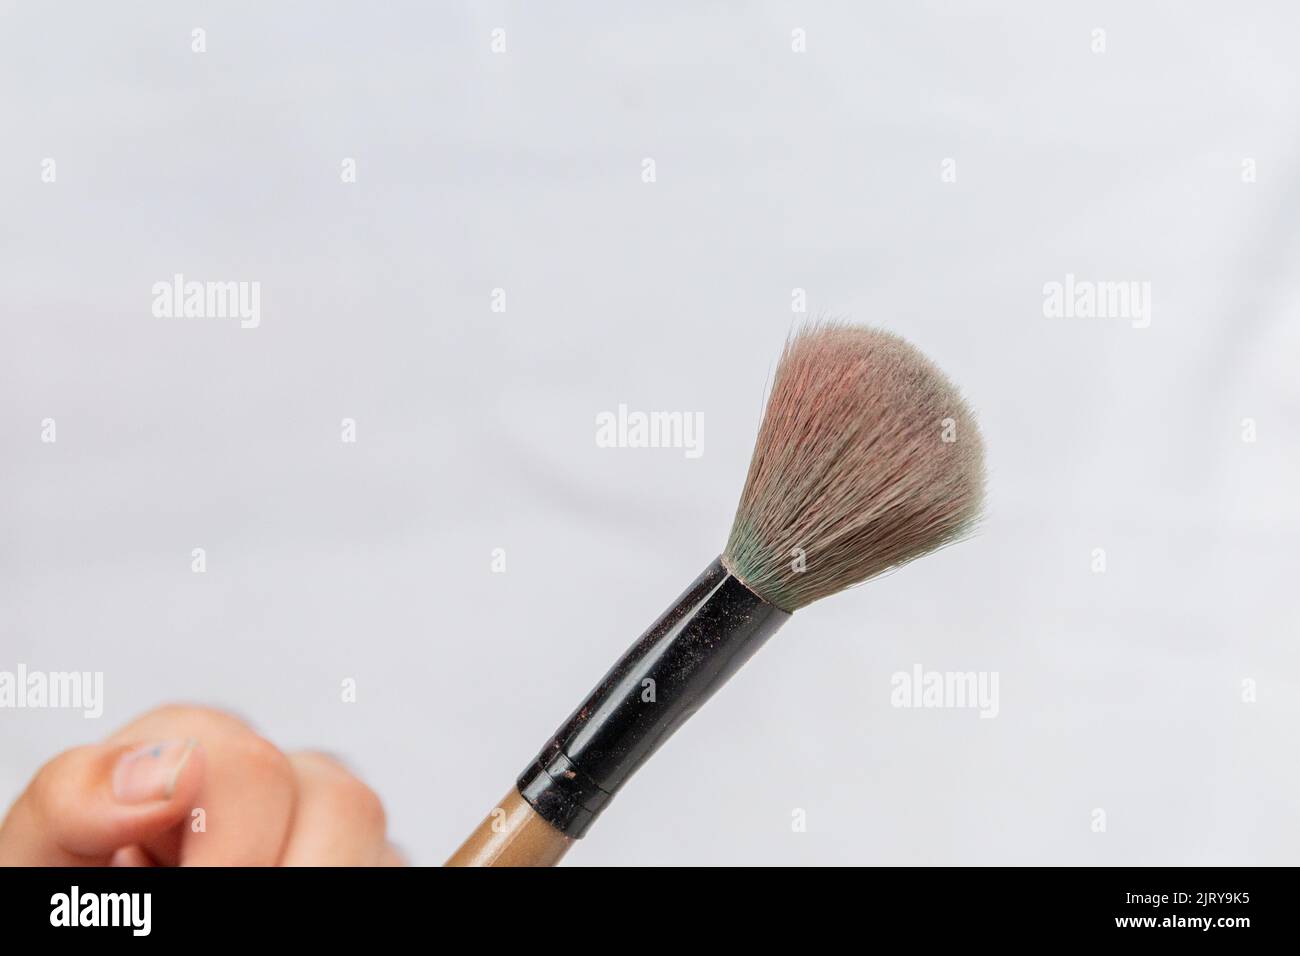 child's hand holding makeup brushes in Rio de Janeiro. Stock Photo